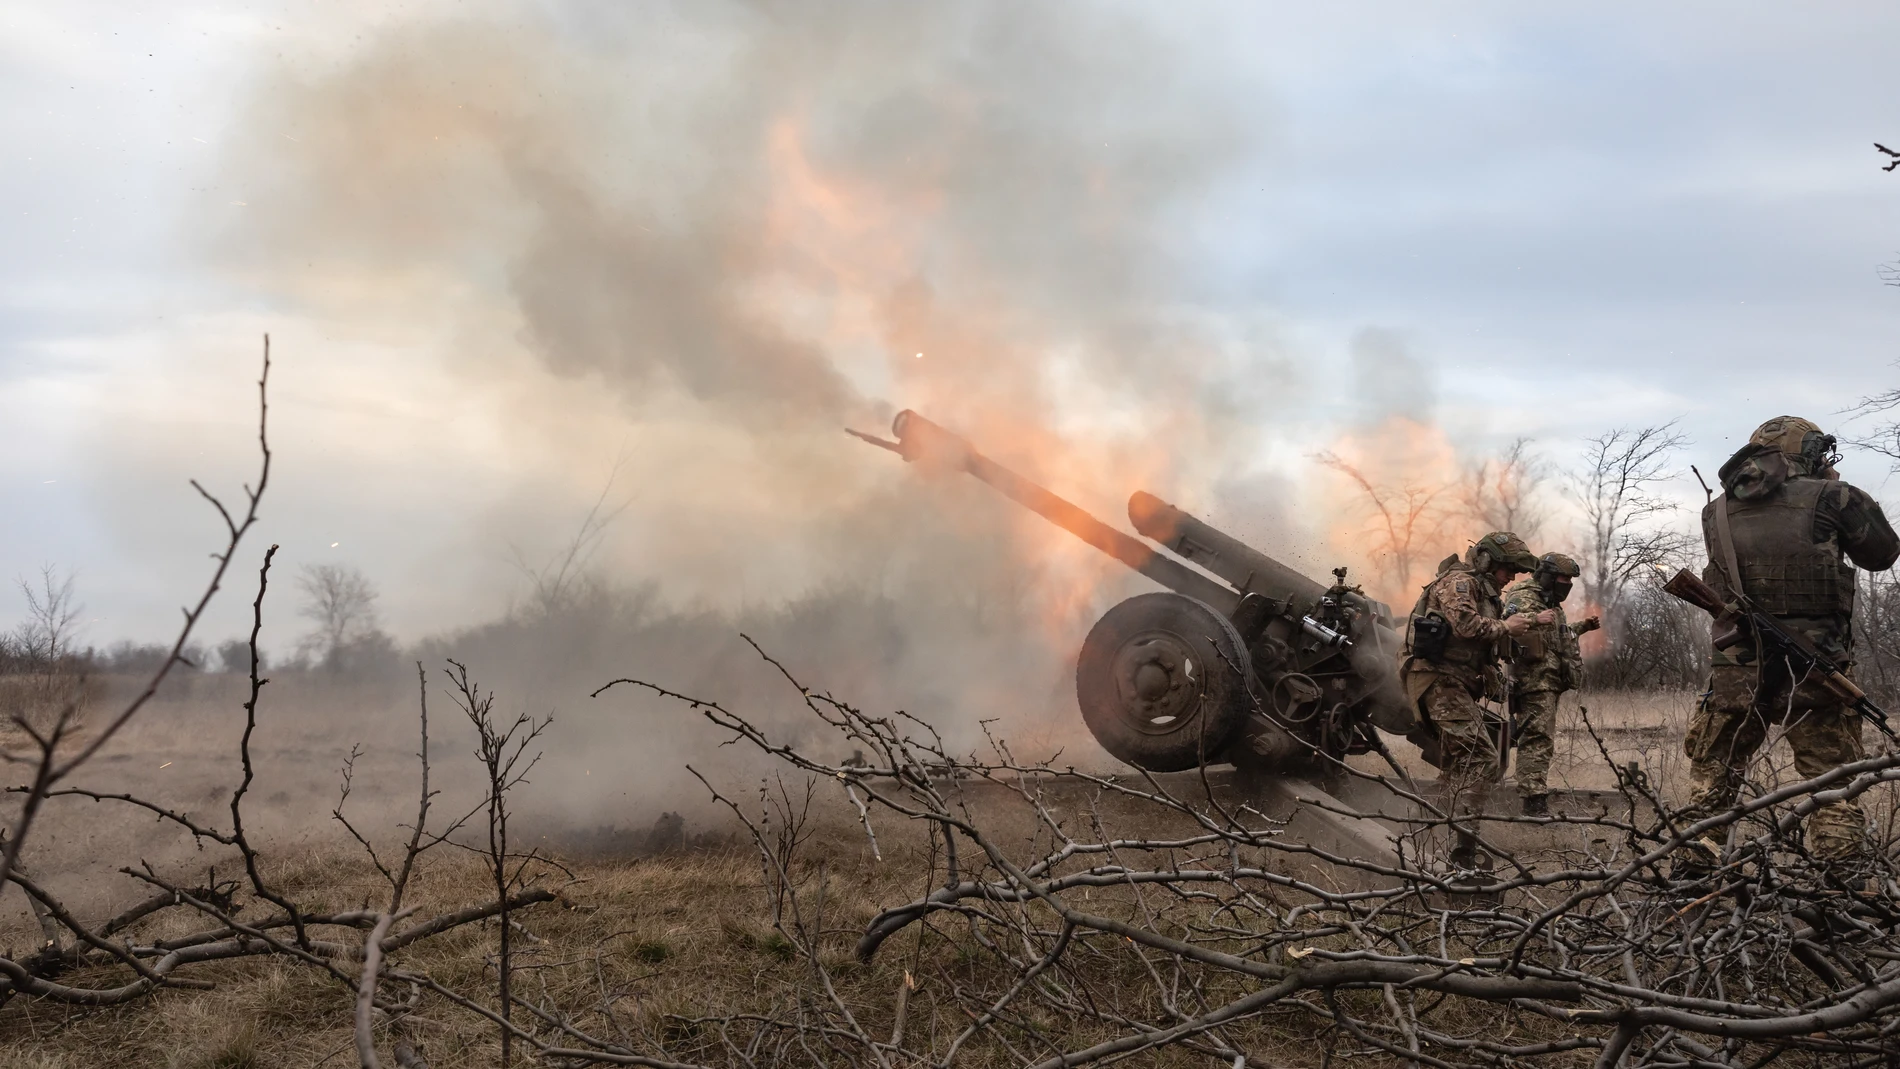 March 21, 2023, Bakhmut, Donetsk Region, Ukraine: Artillerymen from the 24th assault battalion ''Aidar'' shooting from 122 mm howitzer D-30 into Russian positions near Bakhmut, Donetsk region, Ukraine. Ukrainian forces heroically hold positions and attack the enemy near Bakhmut, Donetsk Region. Russian troops continue to storm Bakhmut - they have been unable to take the city since mid-summer 2022.
21/03/2023